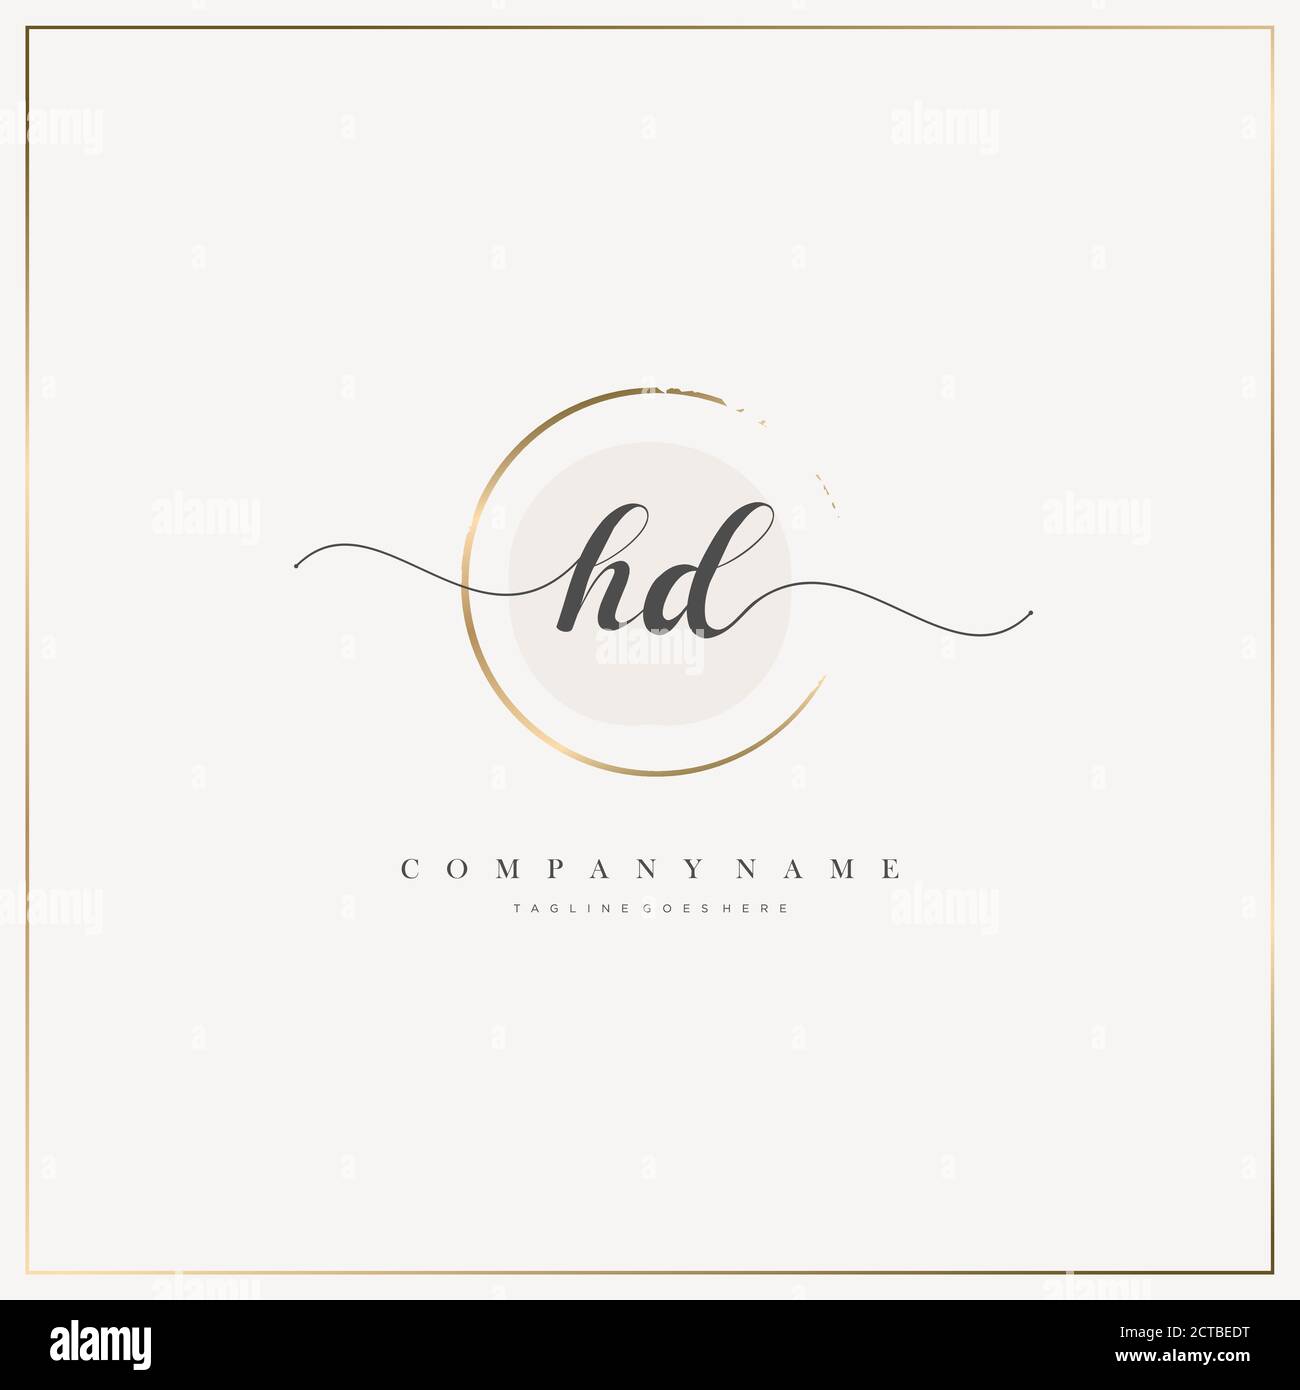 HD Initial Letter handwriting logo hand drawn template vector, logo for beauty, cosmetics, wedding, fashion and business Stock Vector